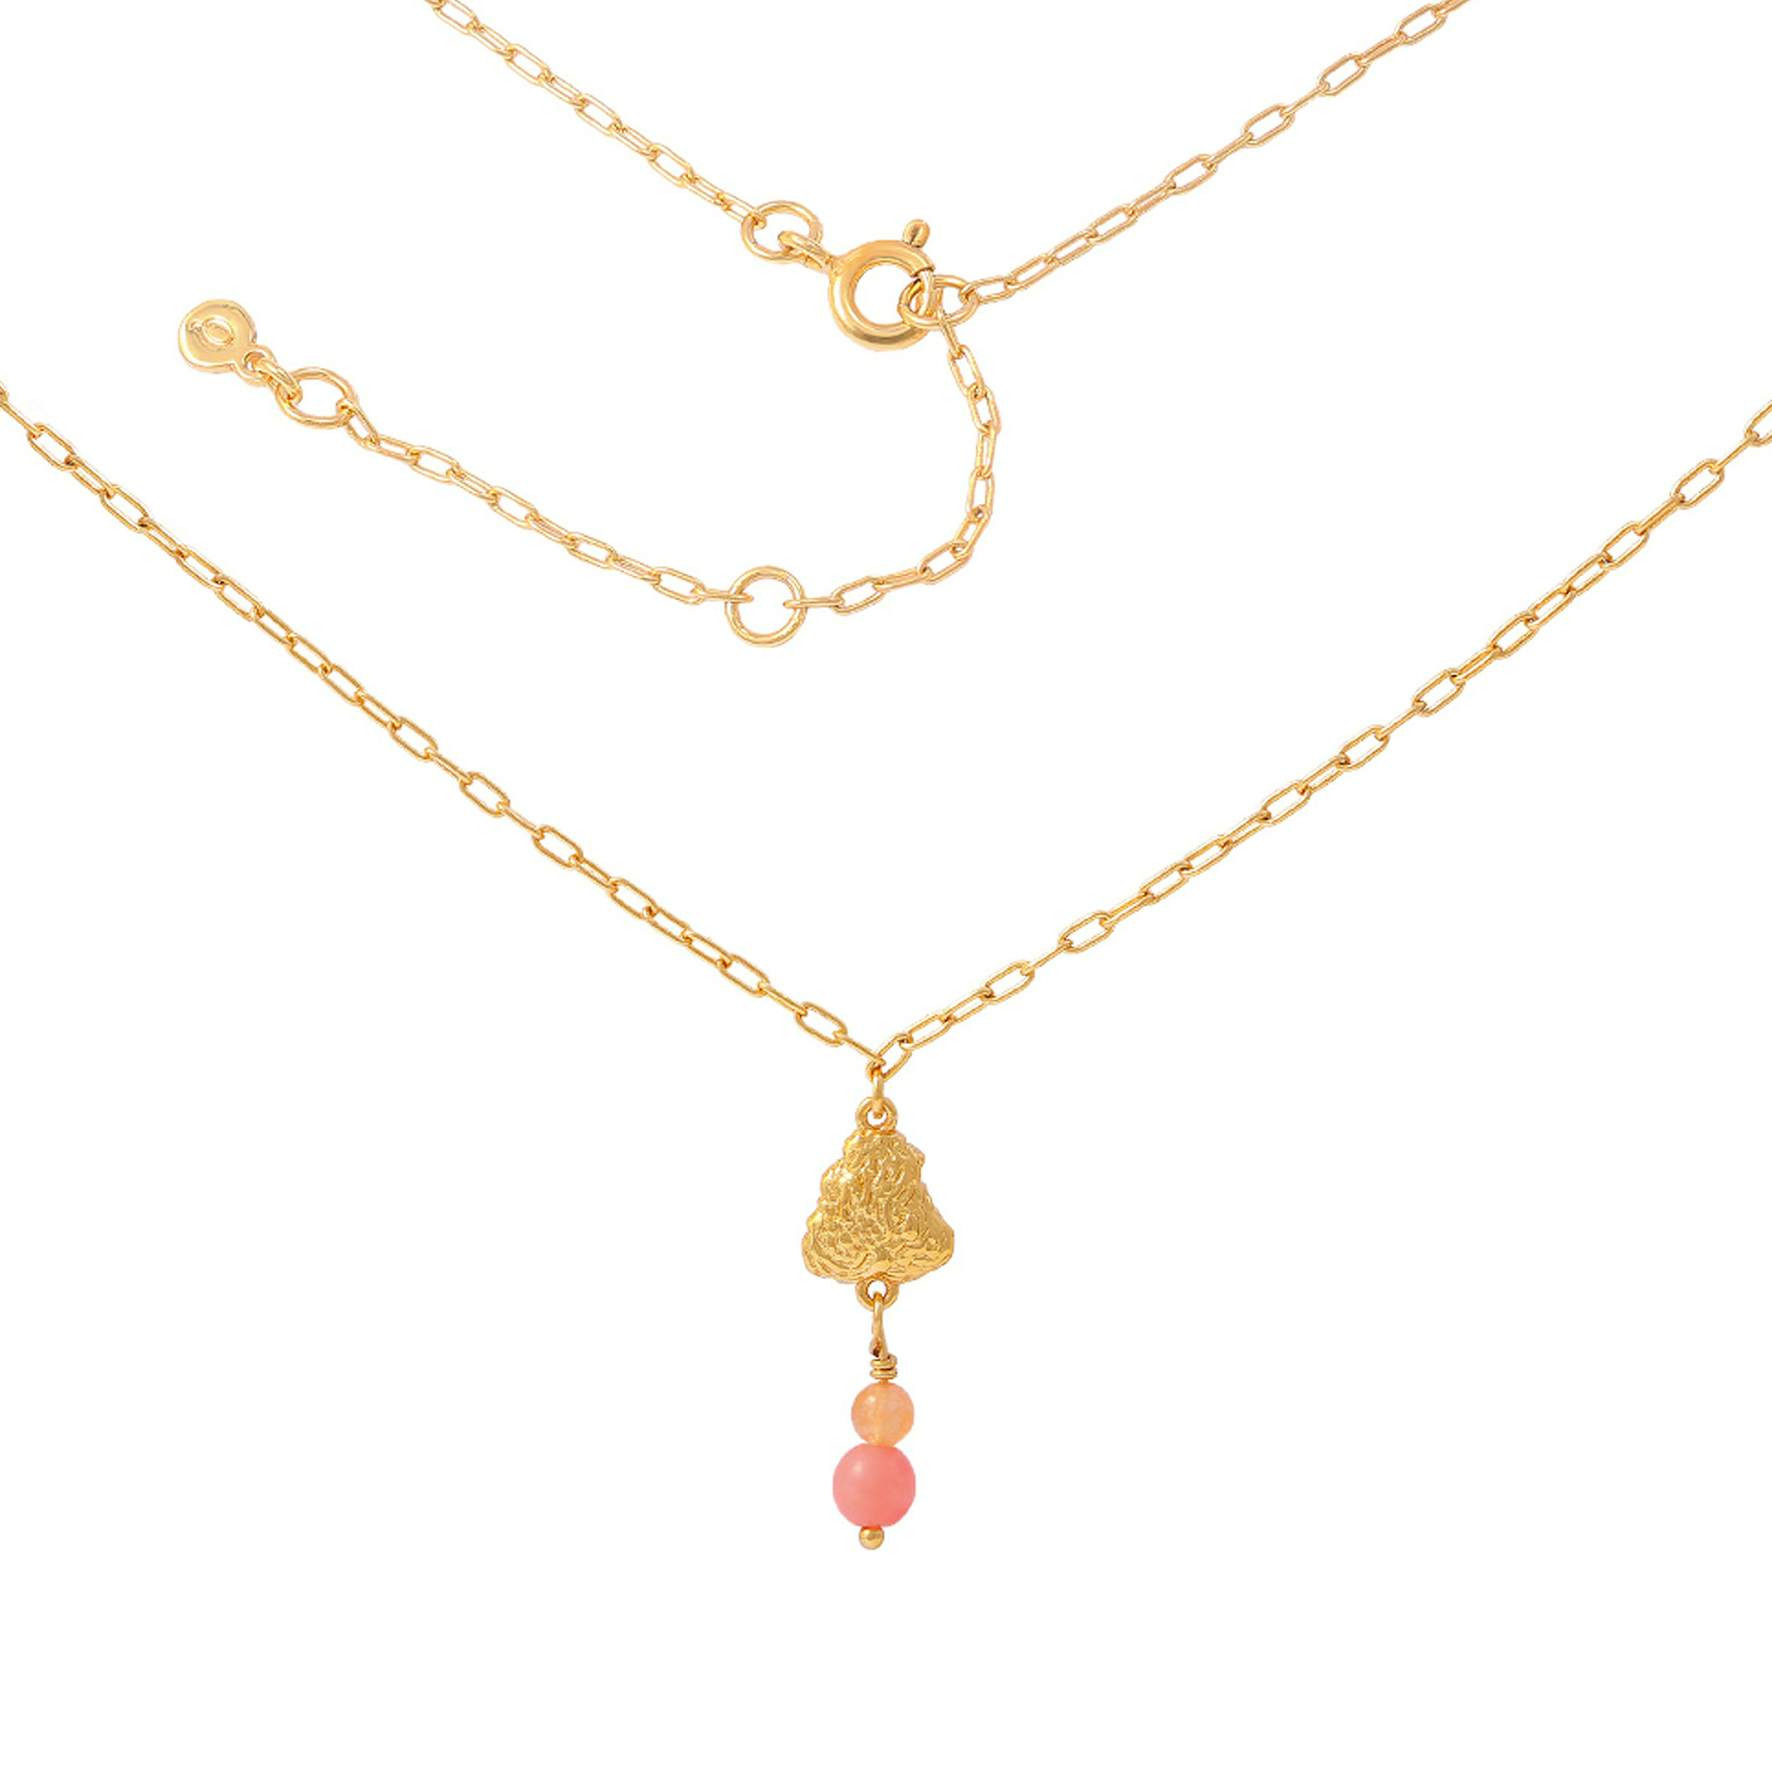 Coralie Petite Necklace from Hultquist Copenhagen in Goldplated-Silver Sterling 925